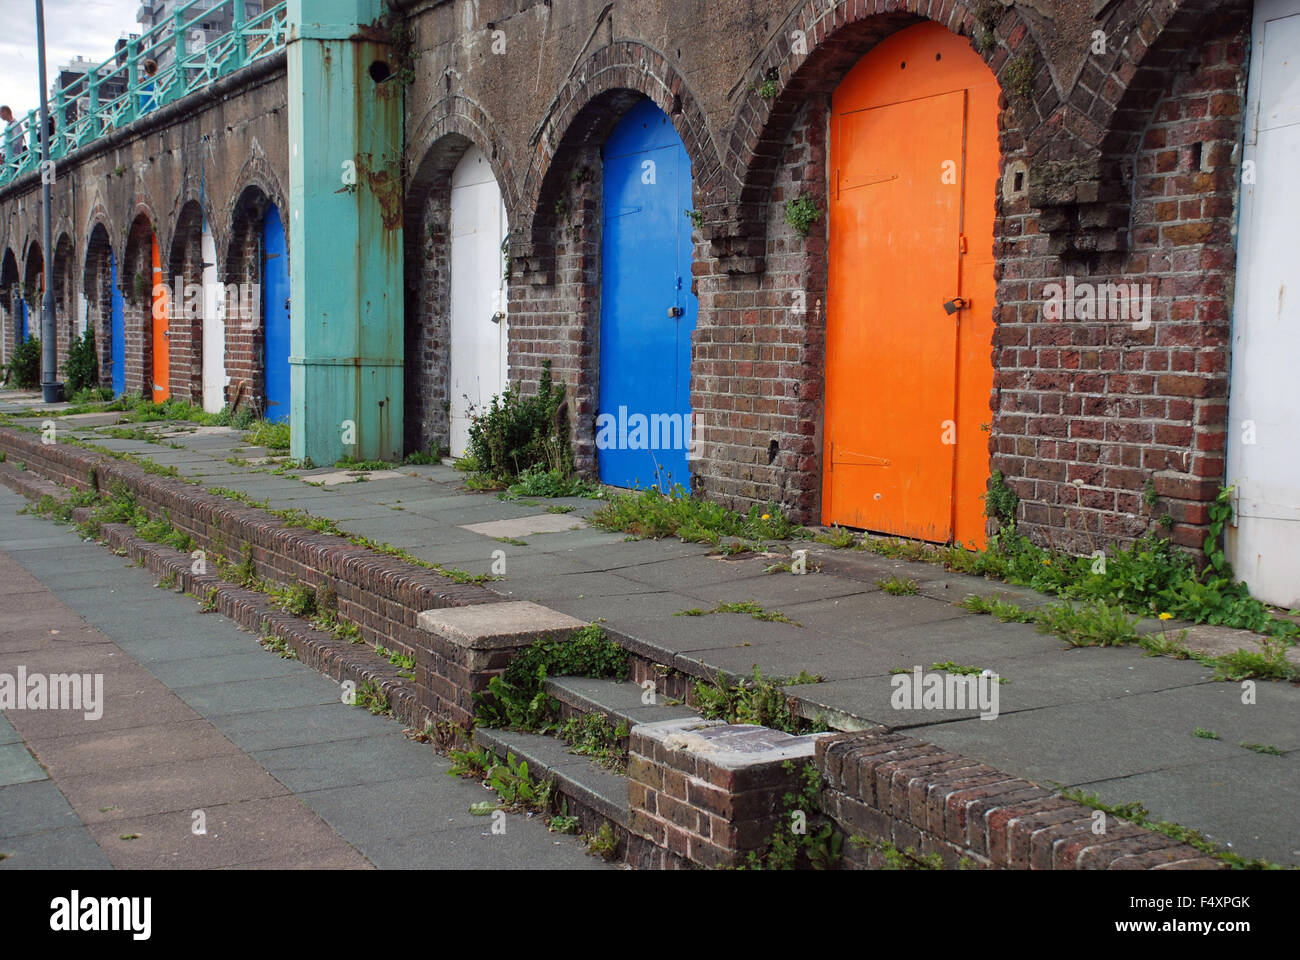 King's Road Arches on Brighton seafront colourful garage doors doorways in Brighton, England Stock Photo